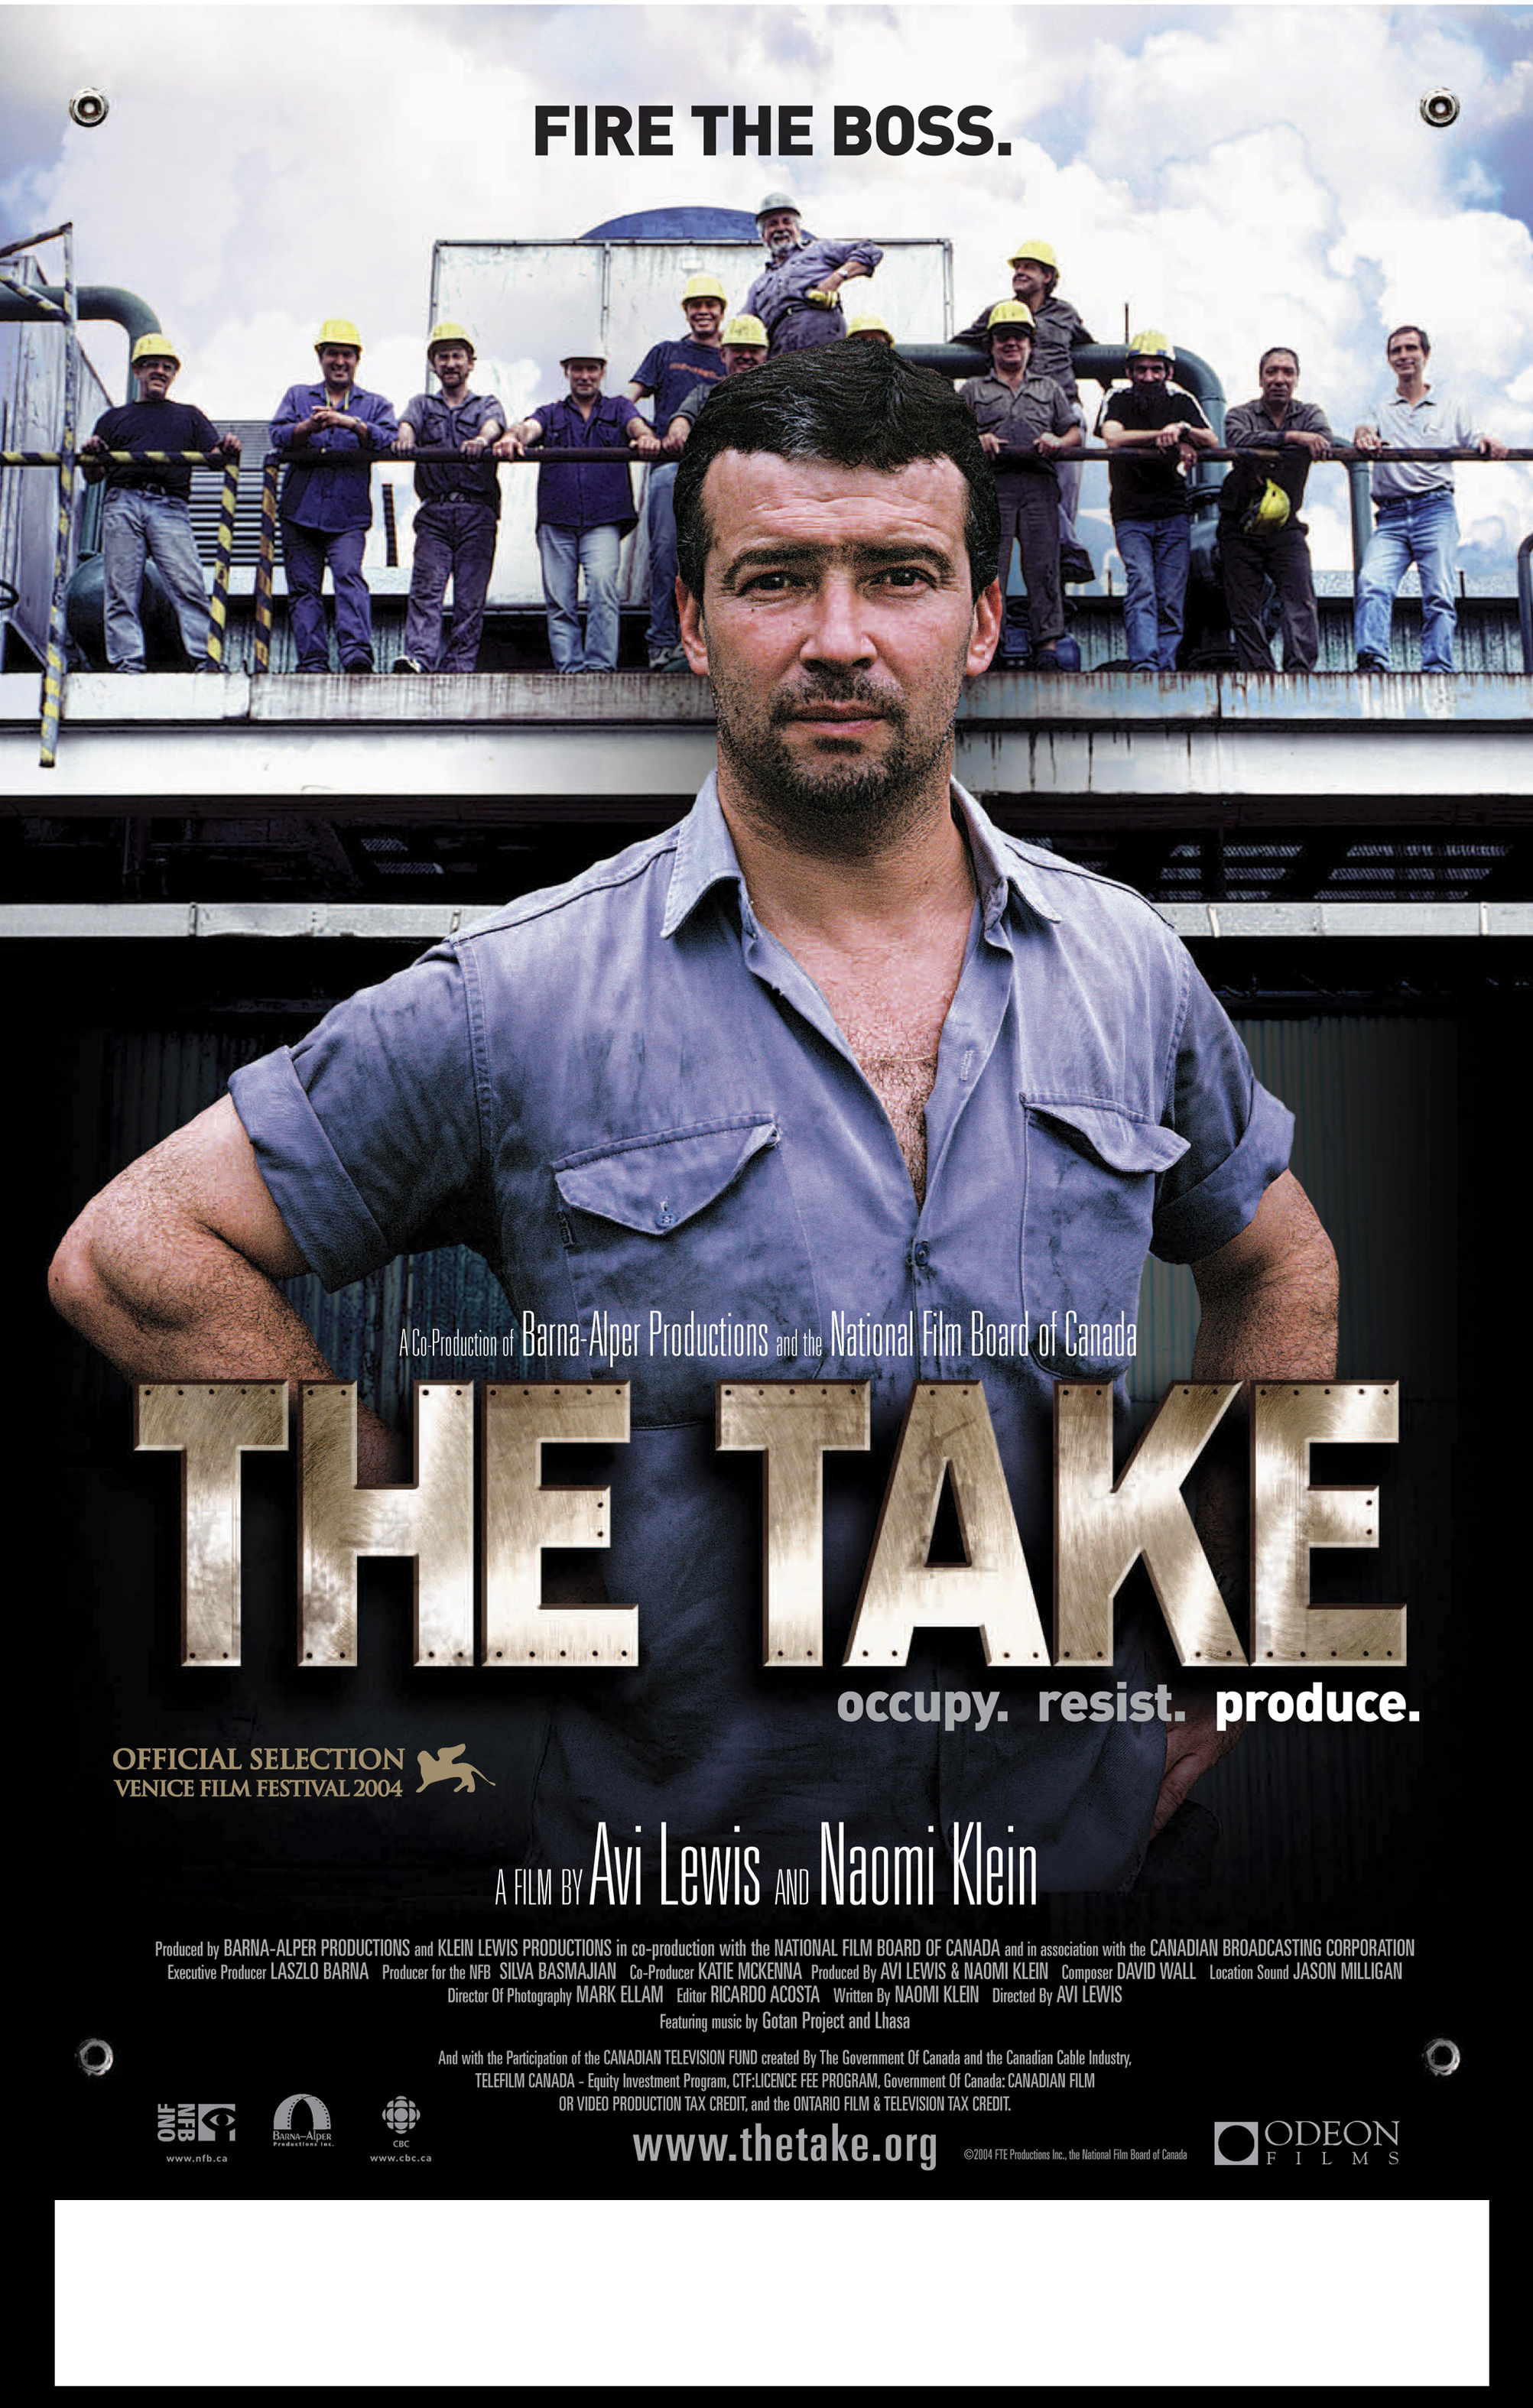 Pick of the Day 3/29: The Take at the Pioneer Valley Workers Center